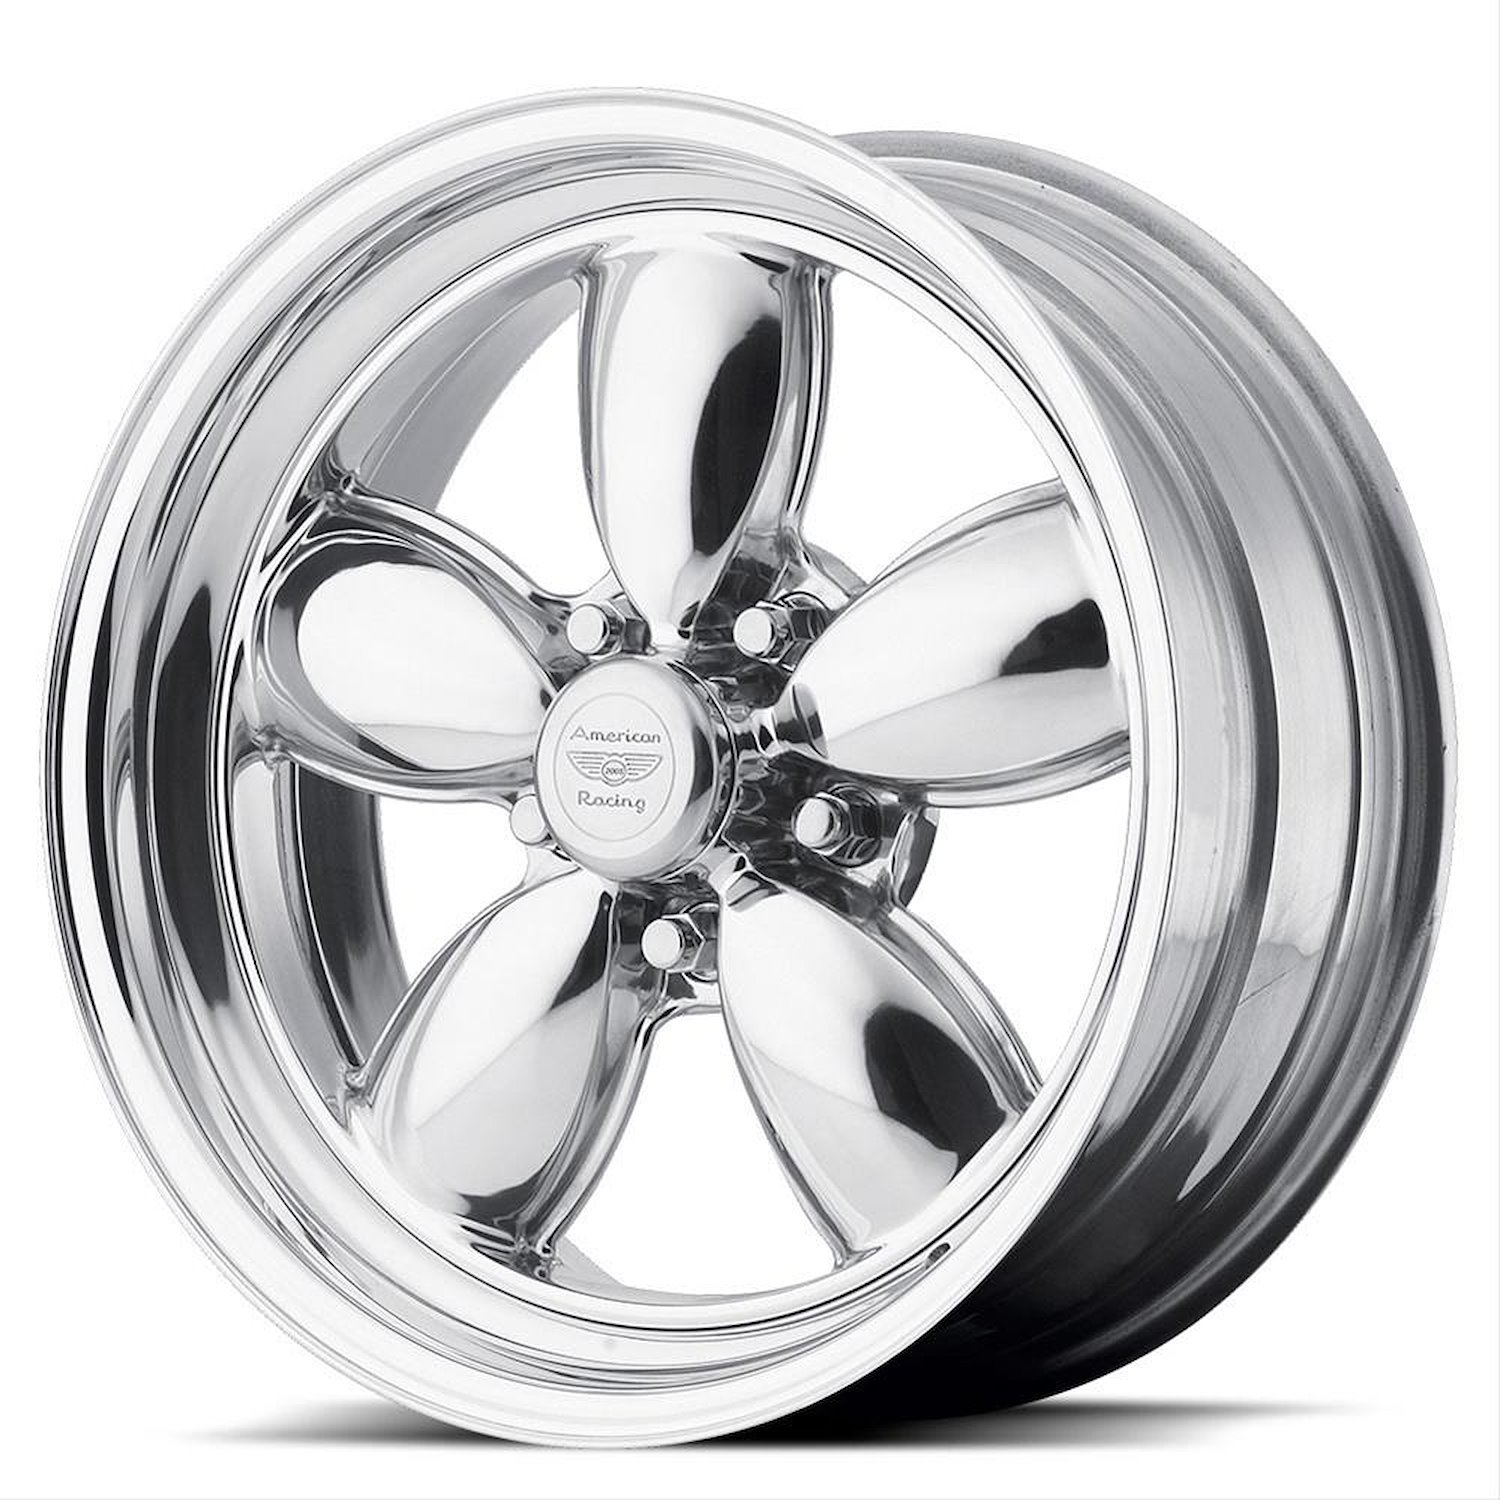 AMERICAN RACING CLASSIC 200S TWO-PIECE POLISHED 15 x 8 5X4.75 13 5.01